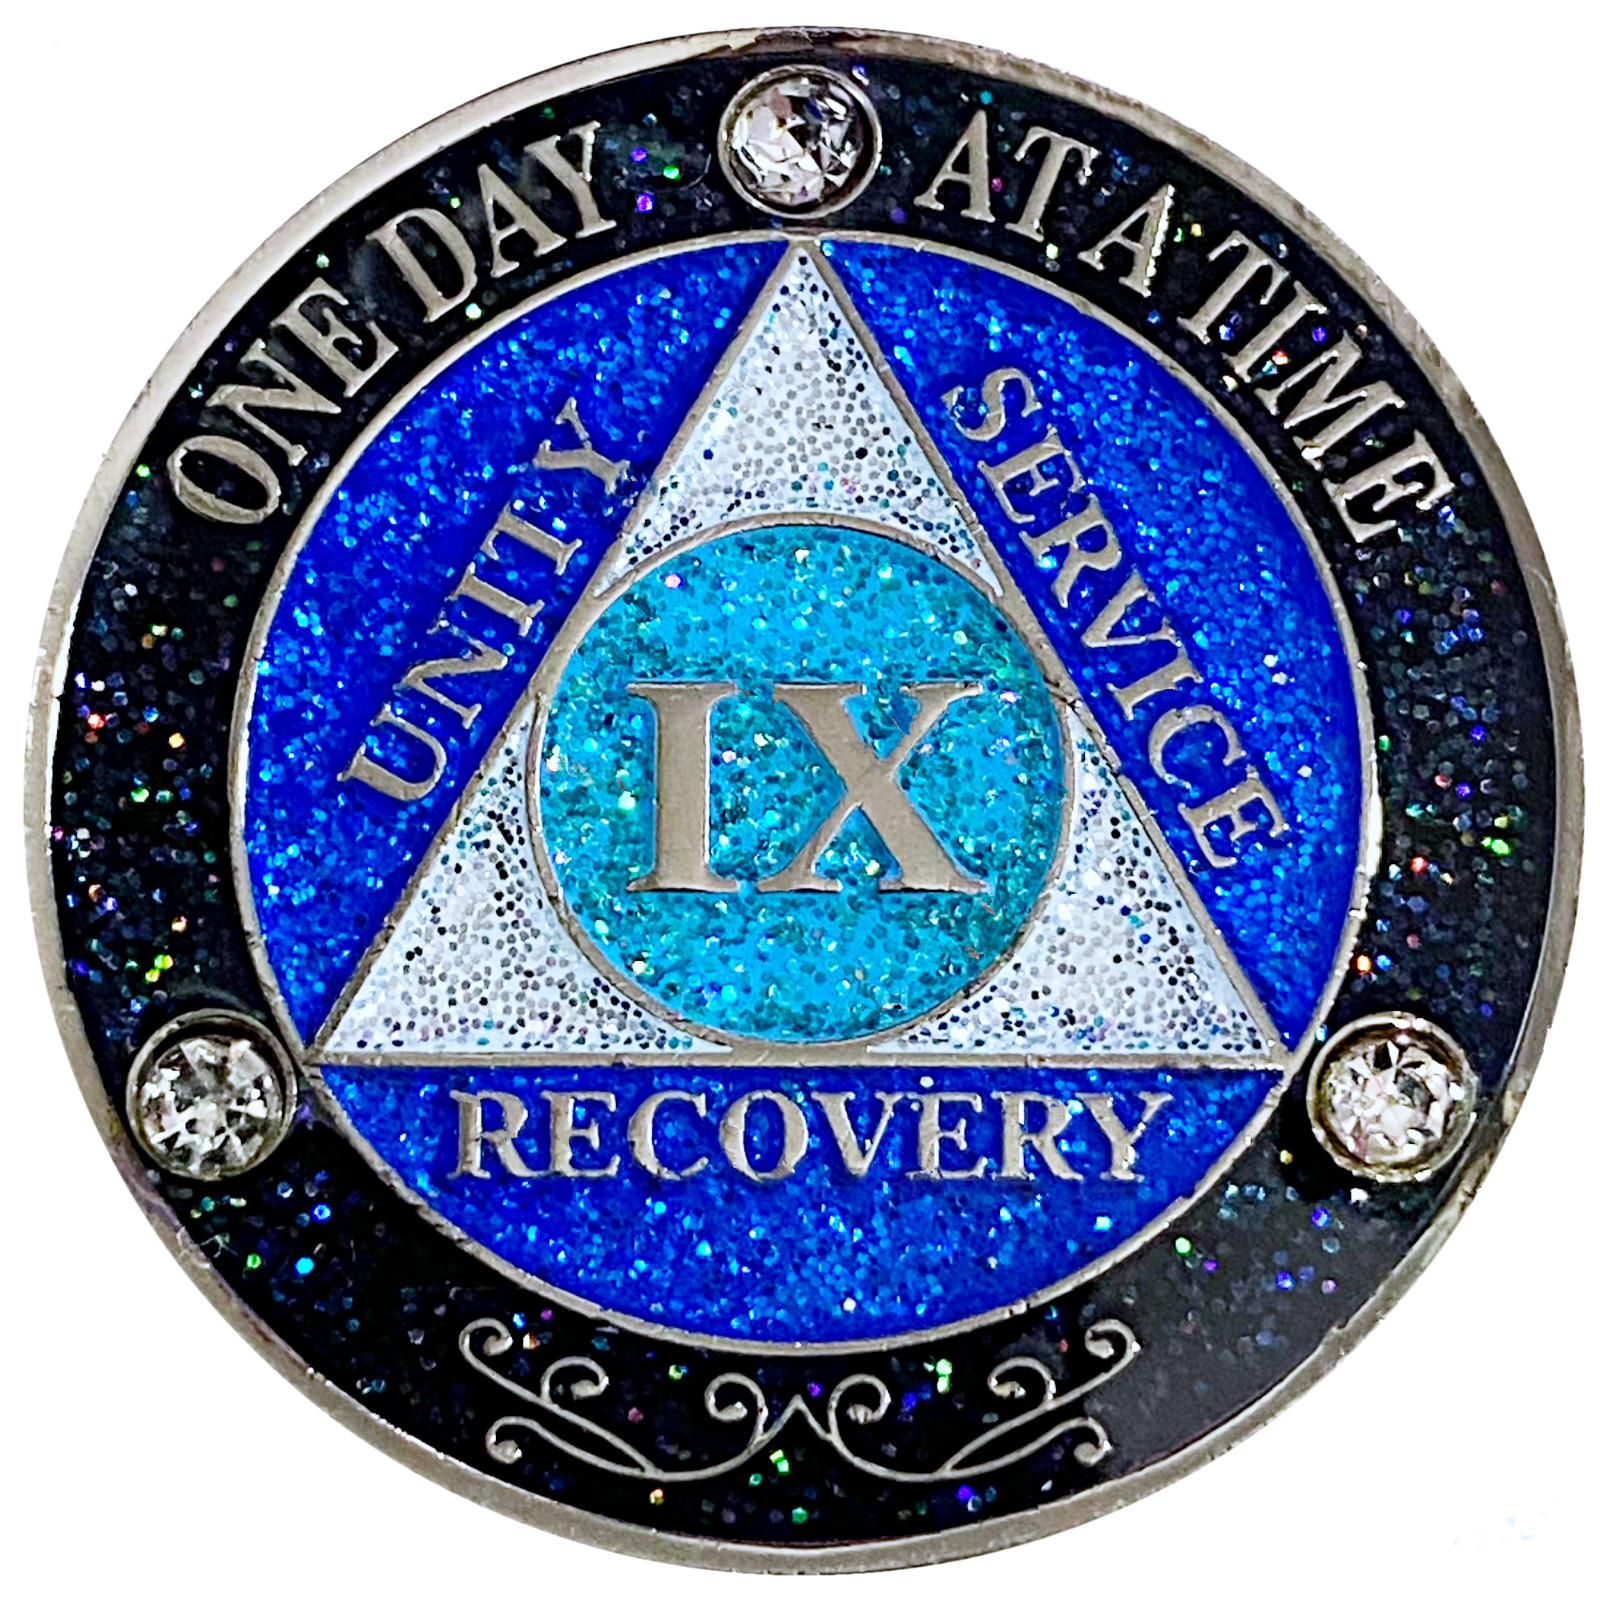 AA 9 Year Crystals & Glitter Medallion, Silver, Blue Color & 3 Crystals